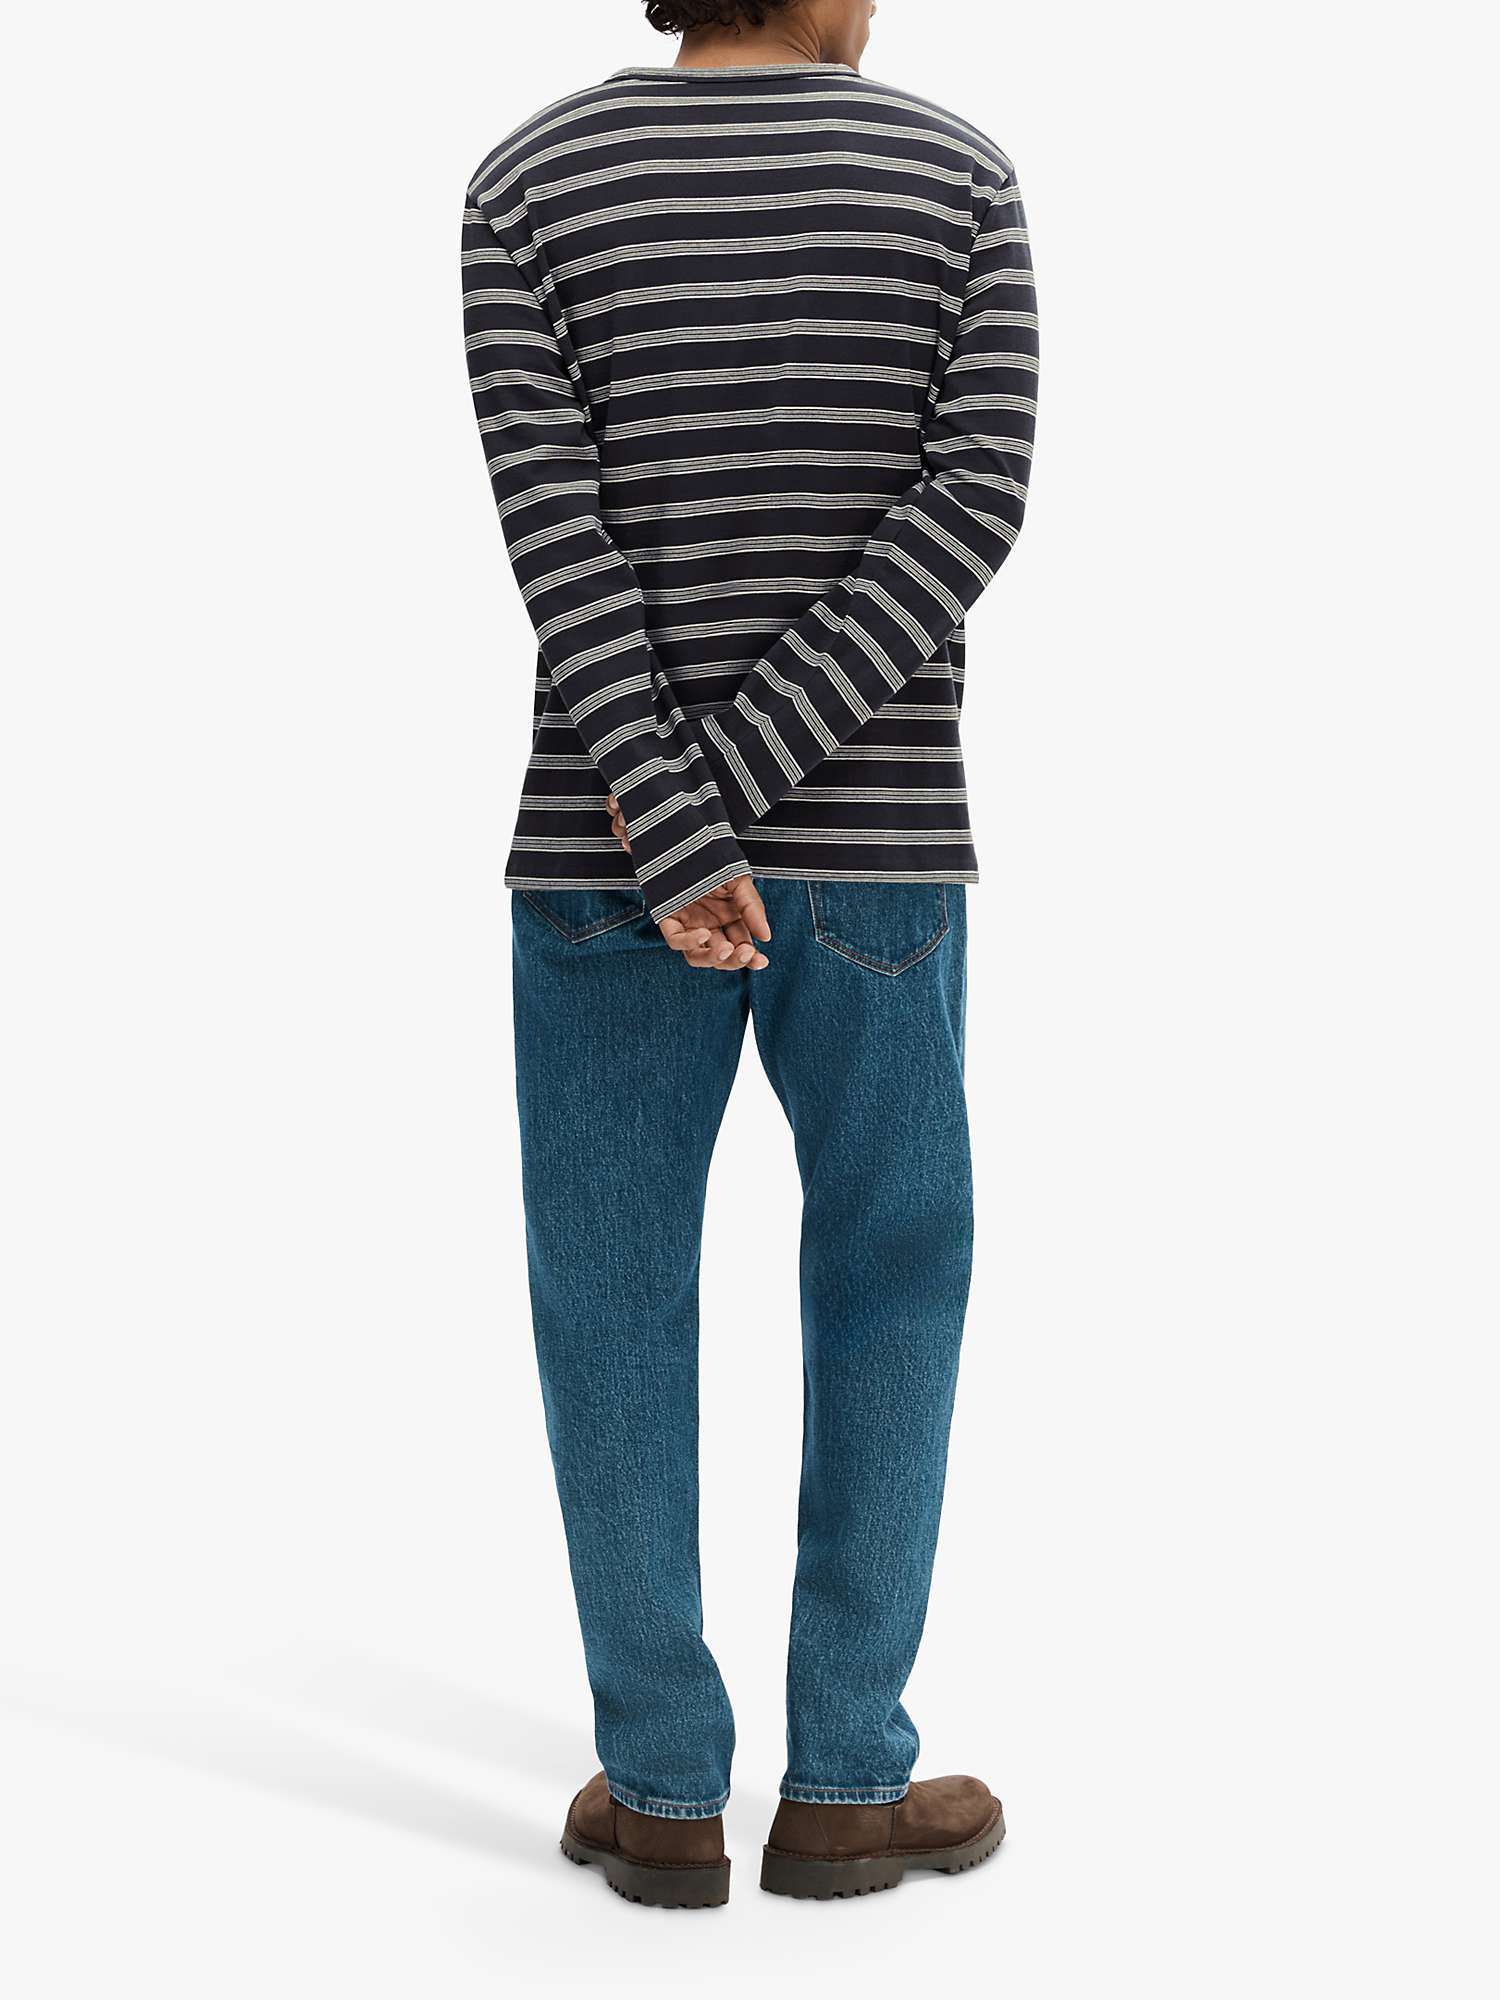 Buy SELECTED HOMME Relaxed Shawn Jumper, Multi Online at johnlewis.com